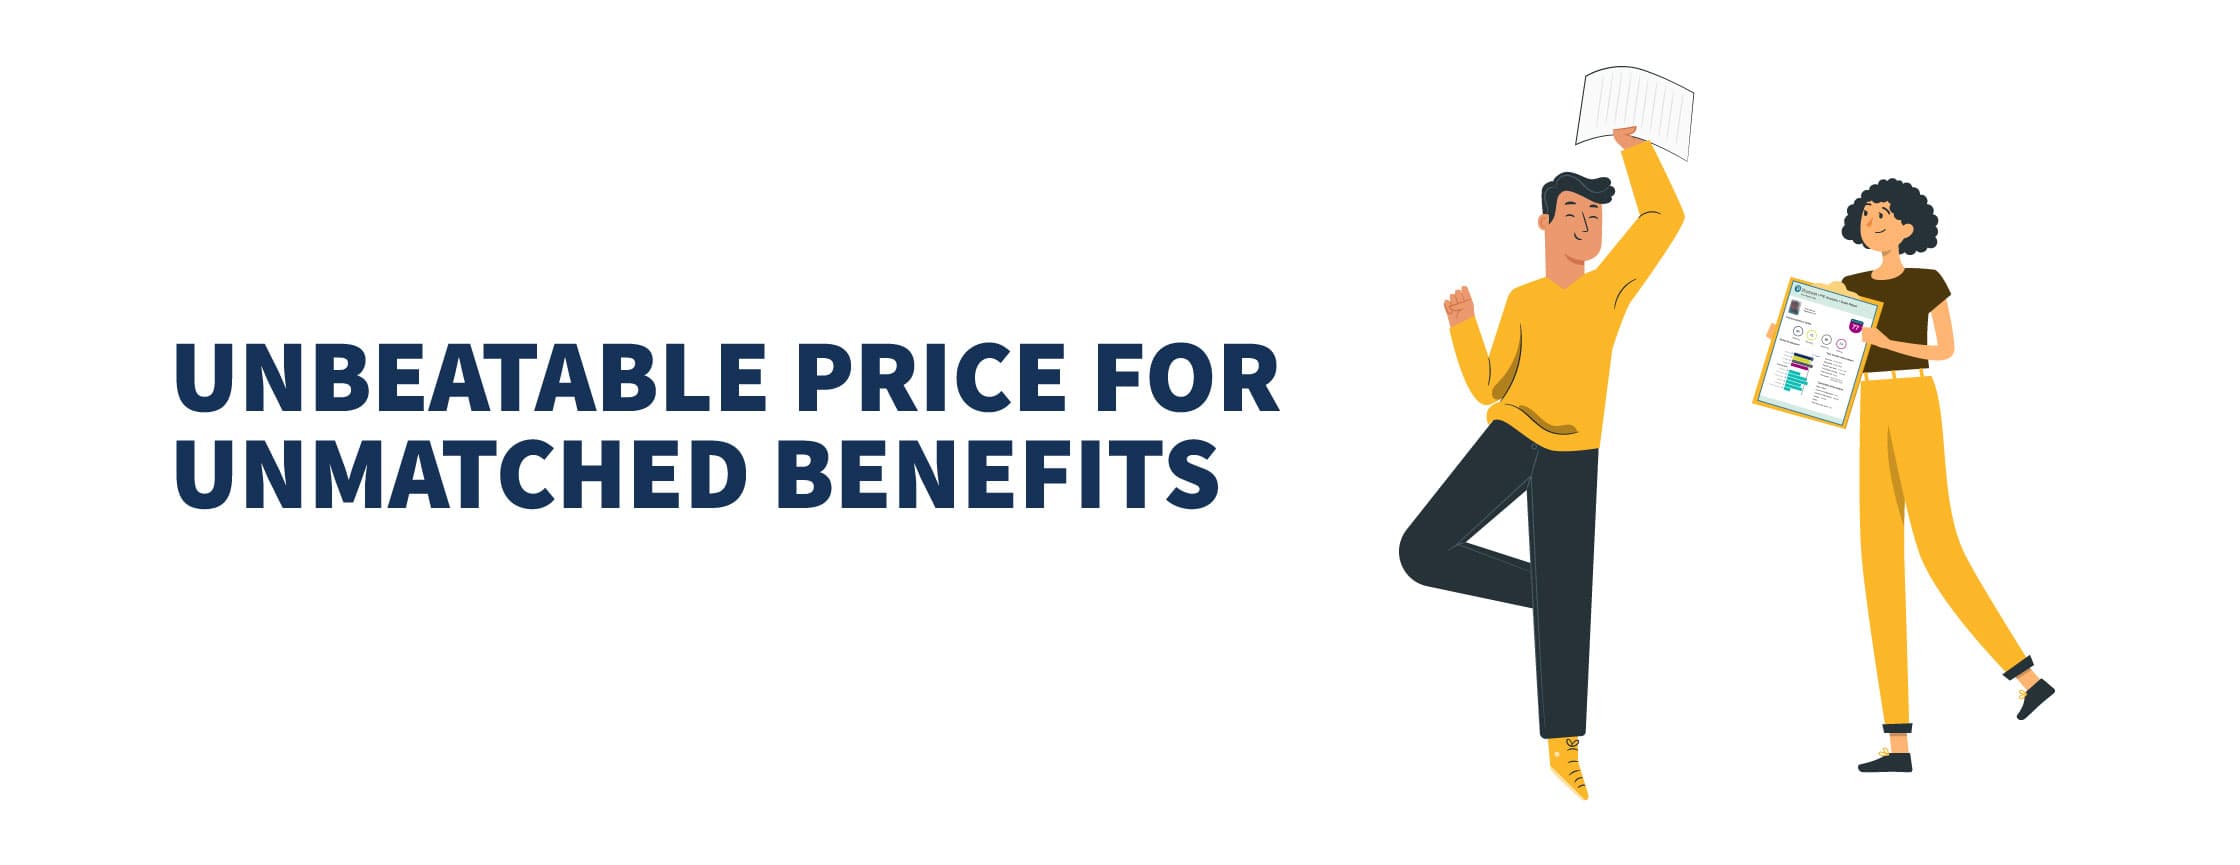 Unbeatable Price for Unmatched Benefits